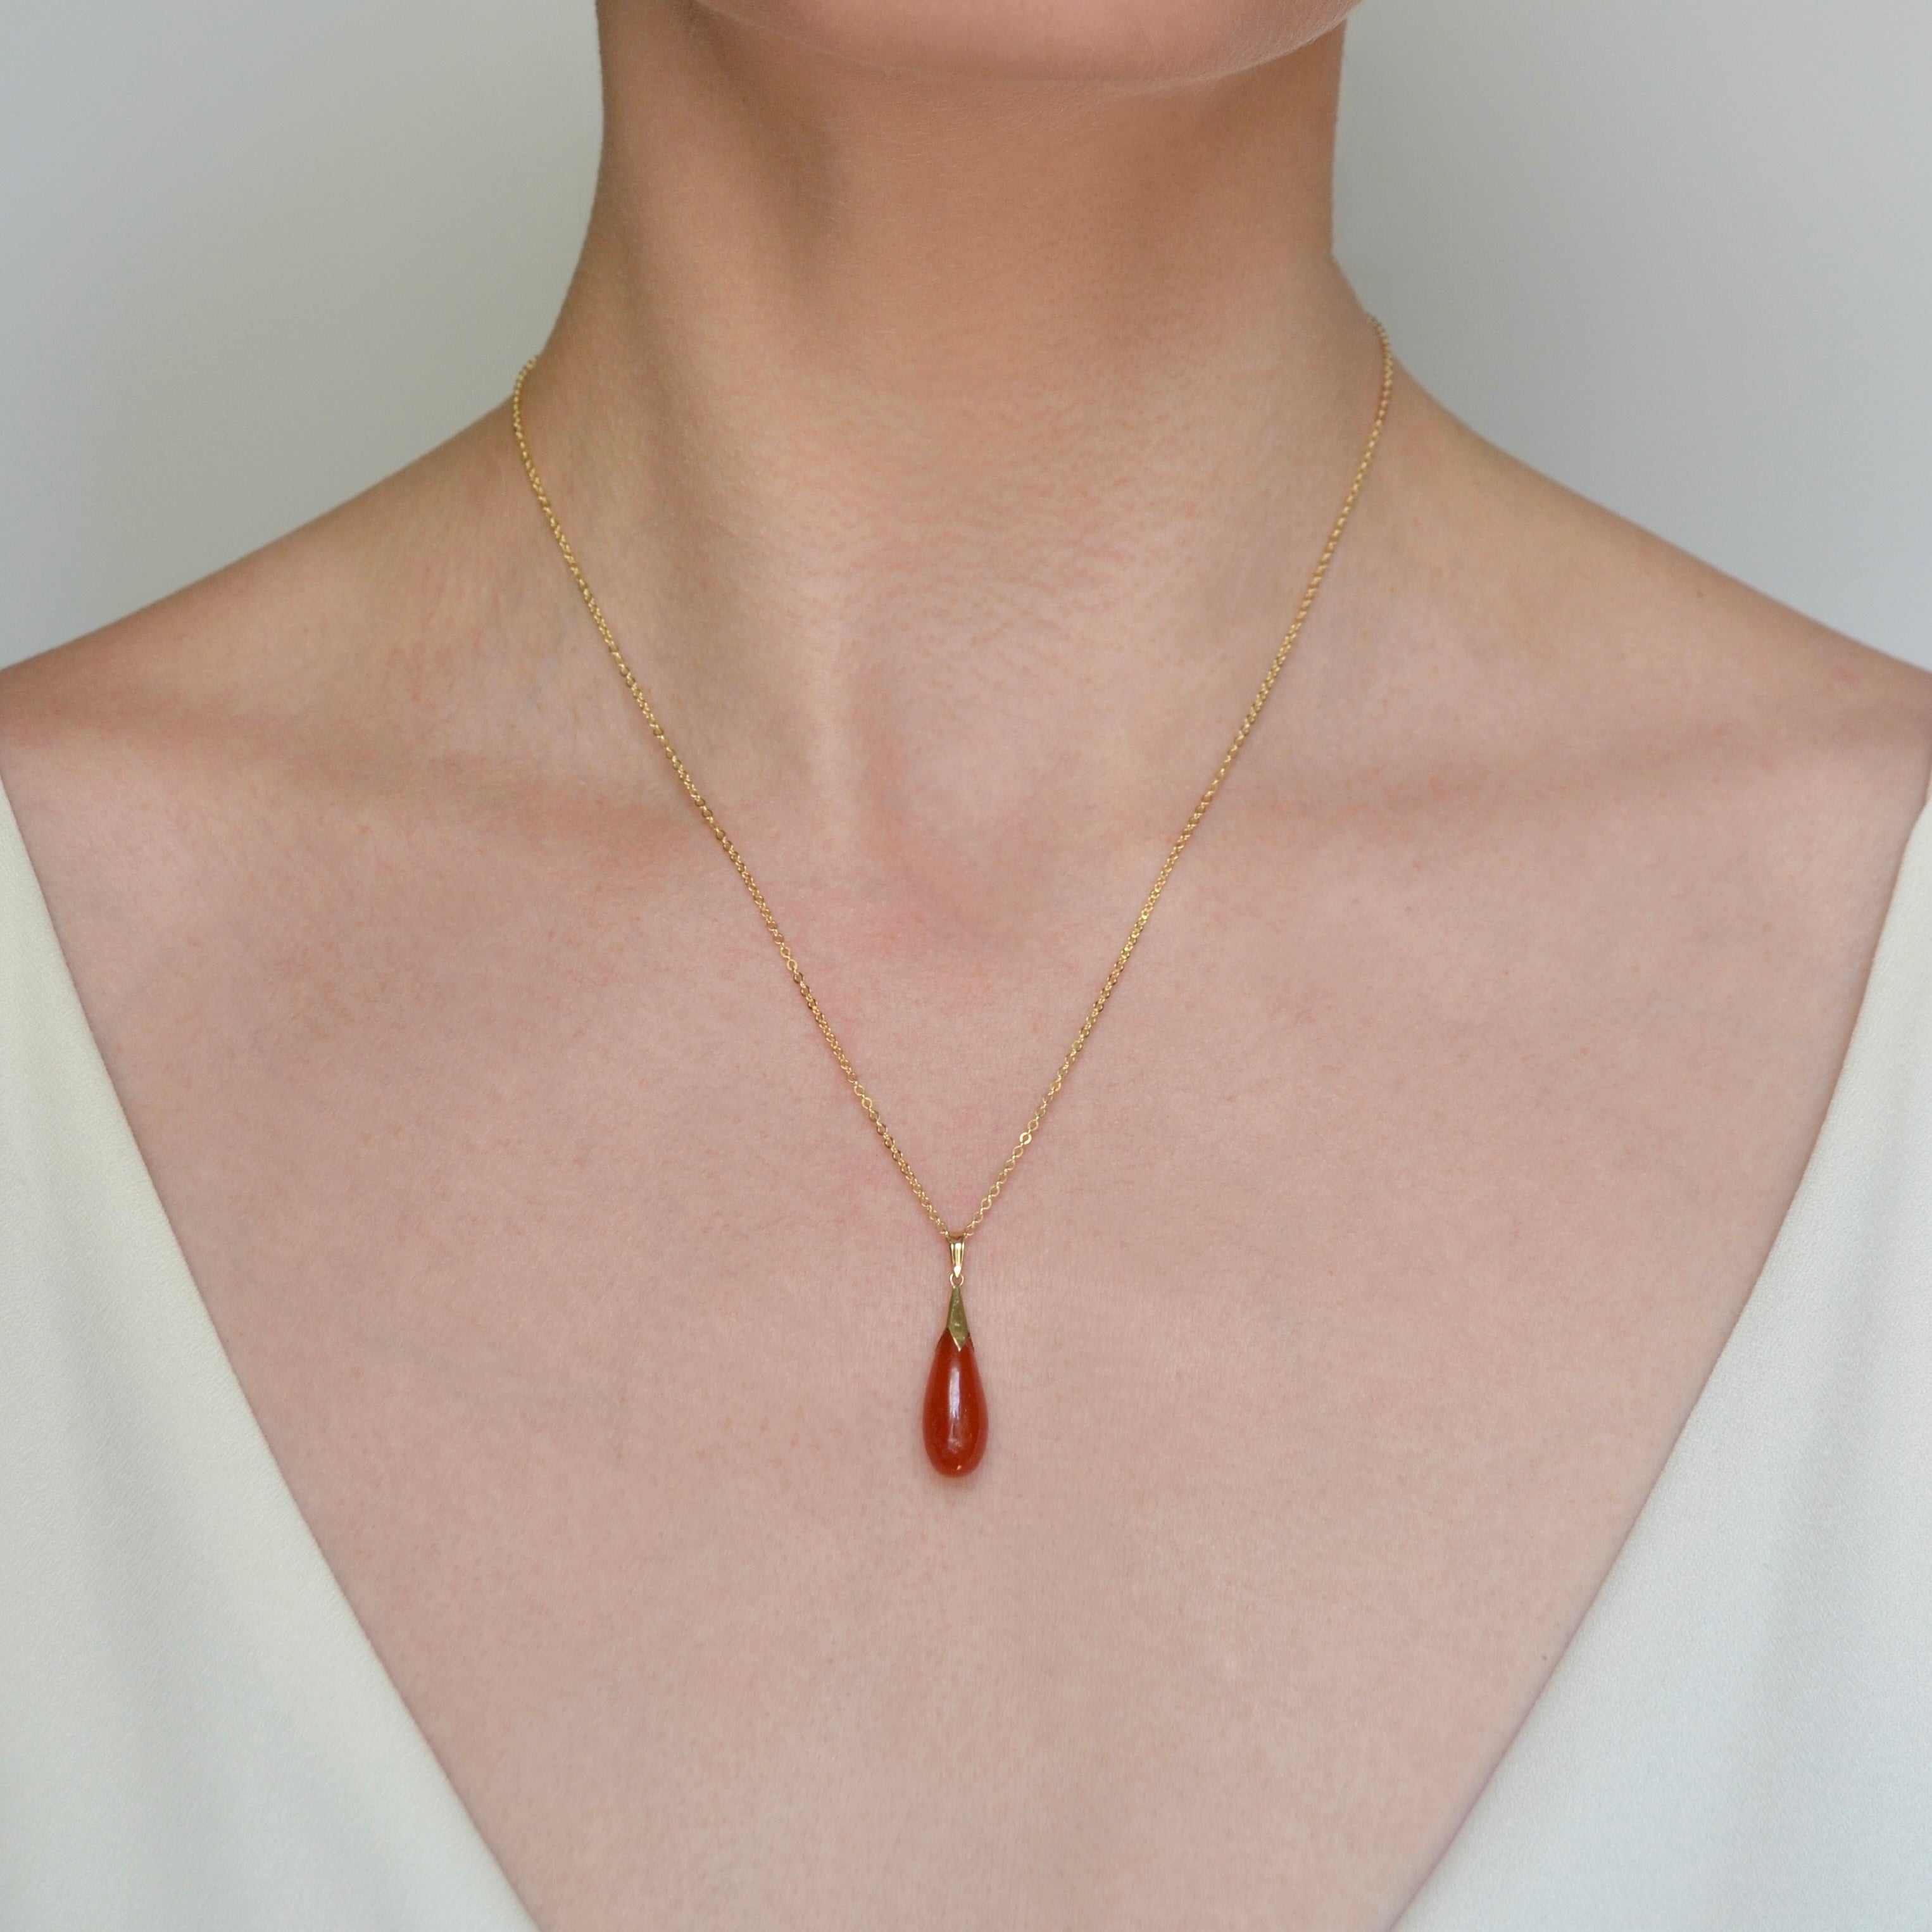 Elisa Gold Pendant Necklace in Red Illusion | Kendra Scott